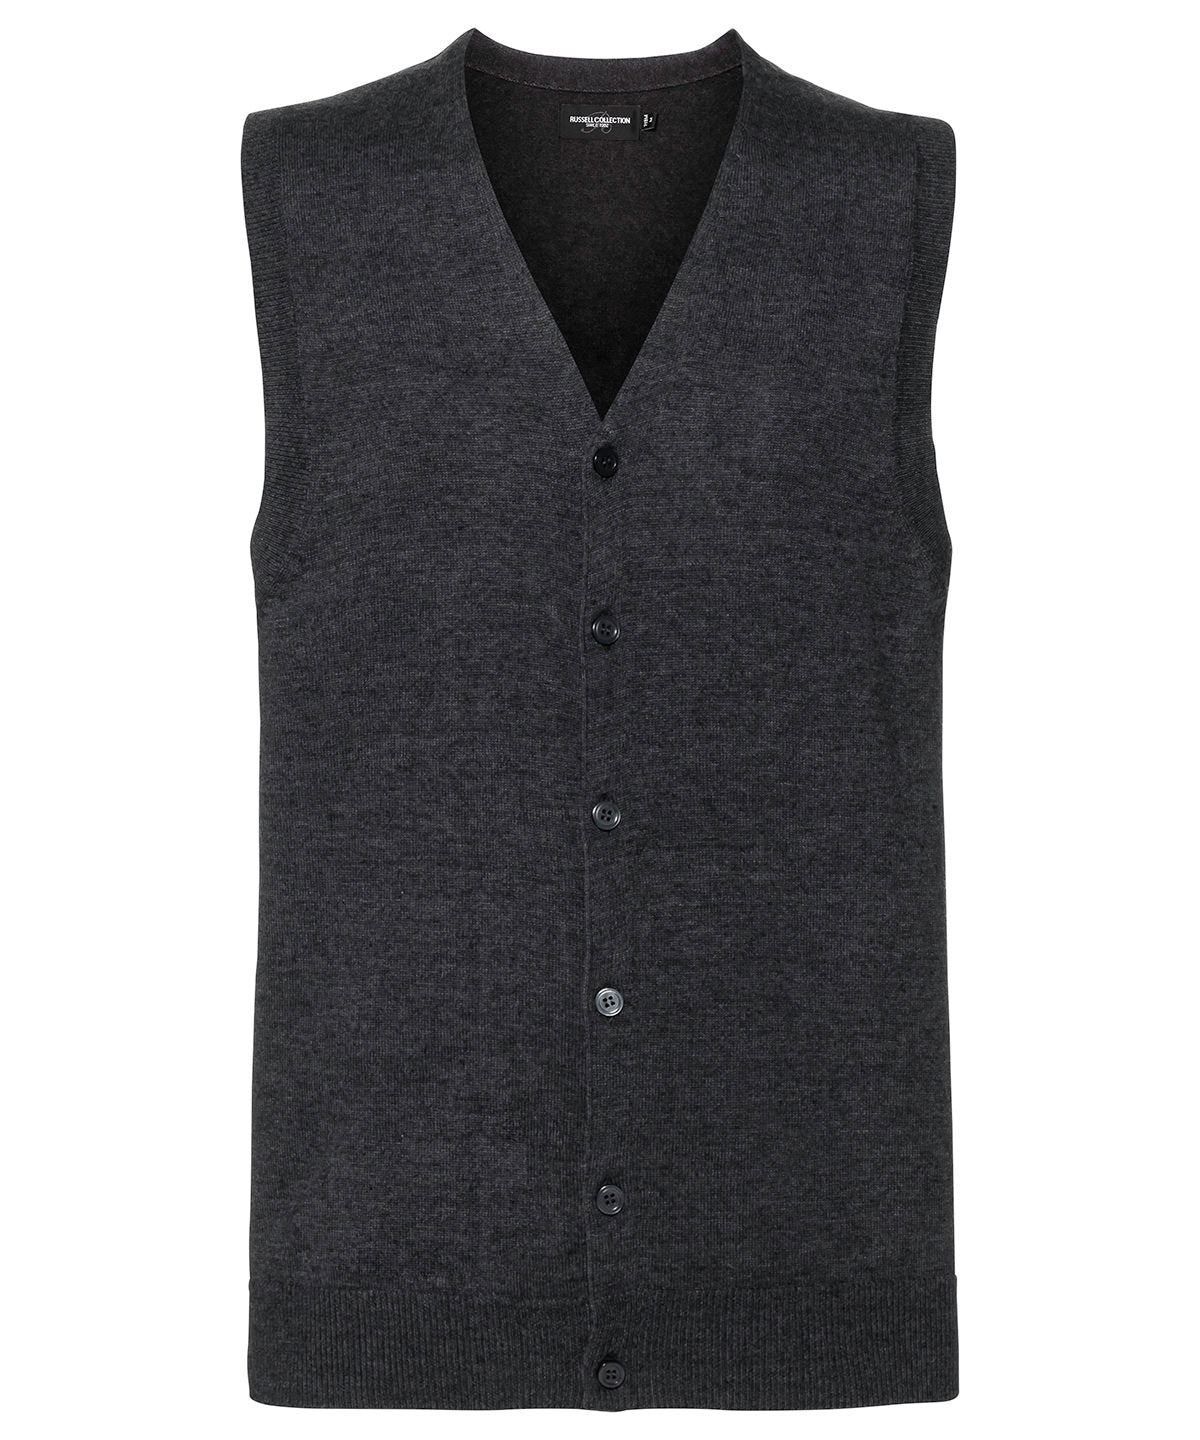 Russell V-Neck Sleeveless Knitted Cardigan